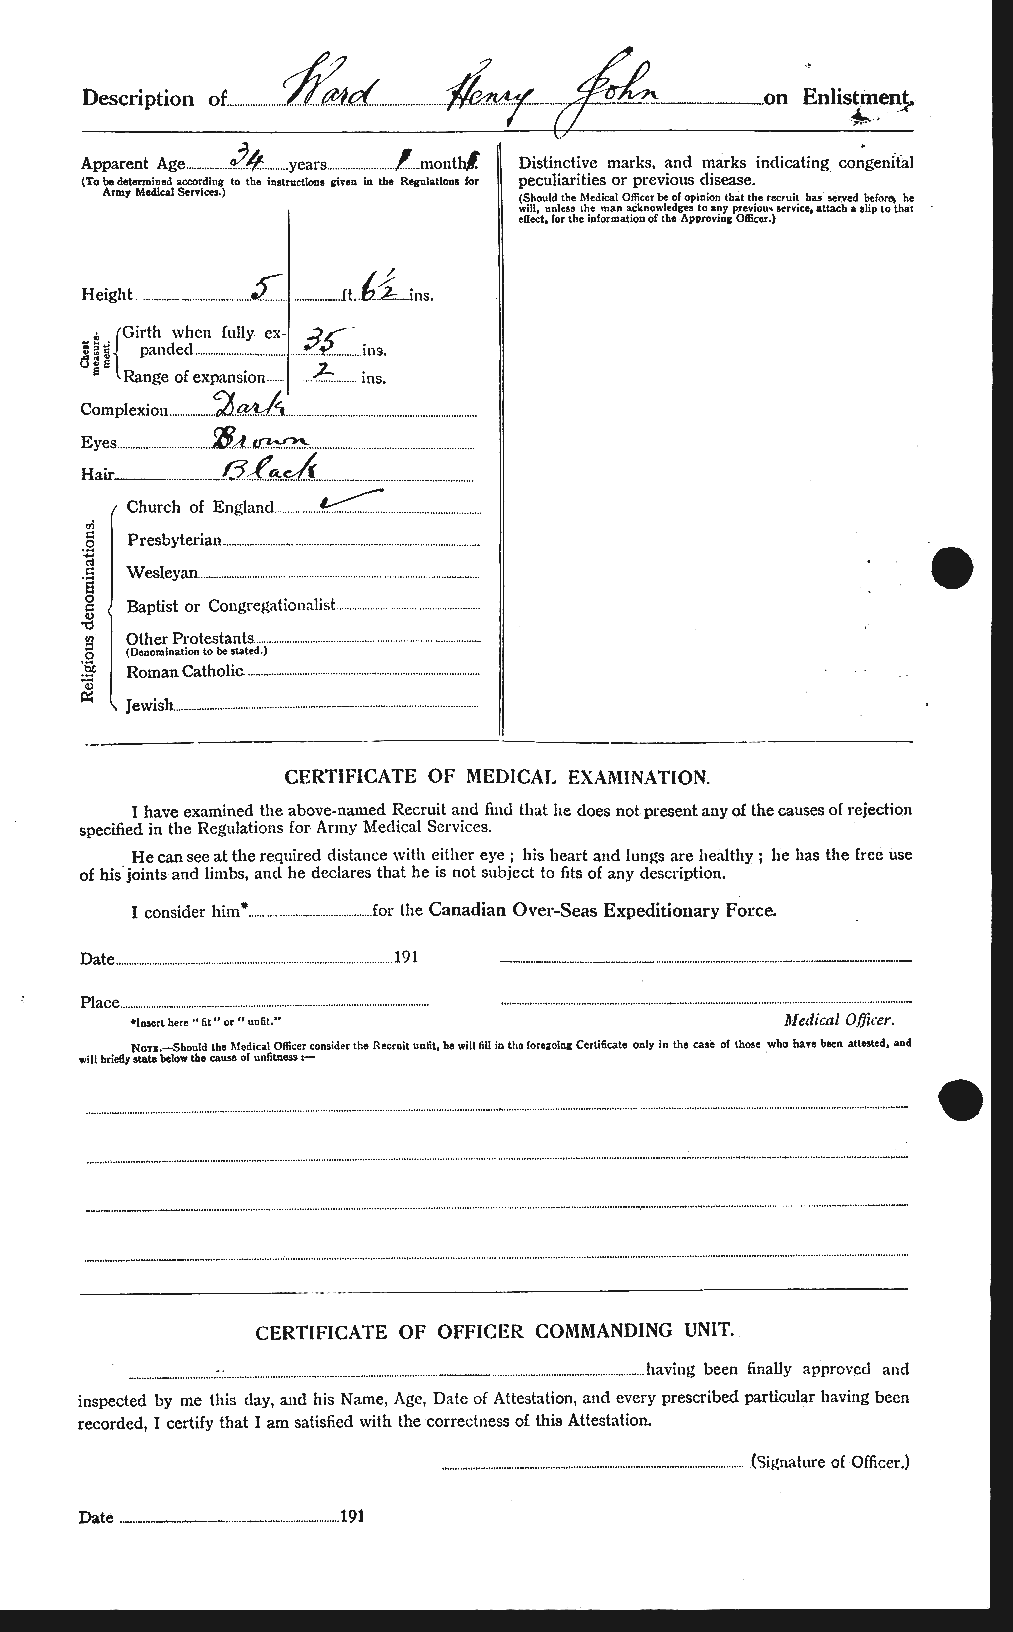 Personnel Records of the First World War - CEF 657841b